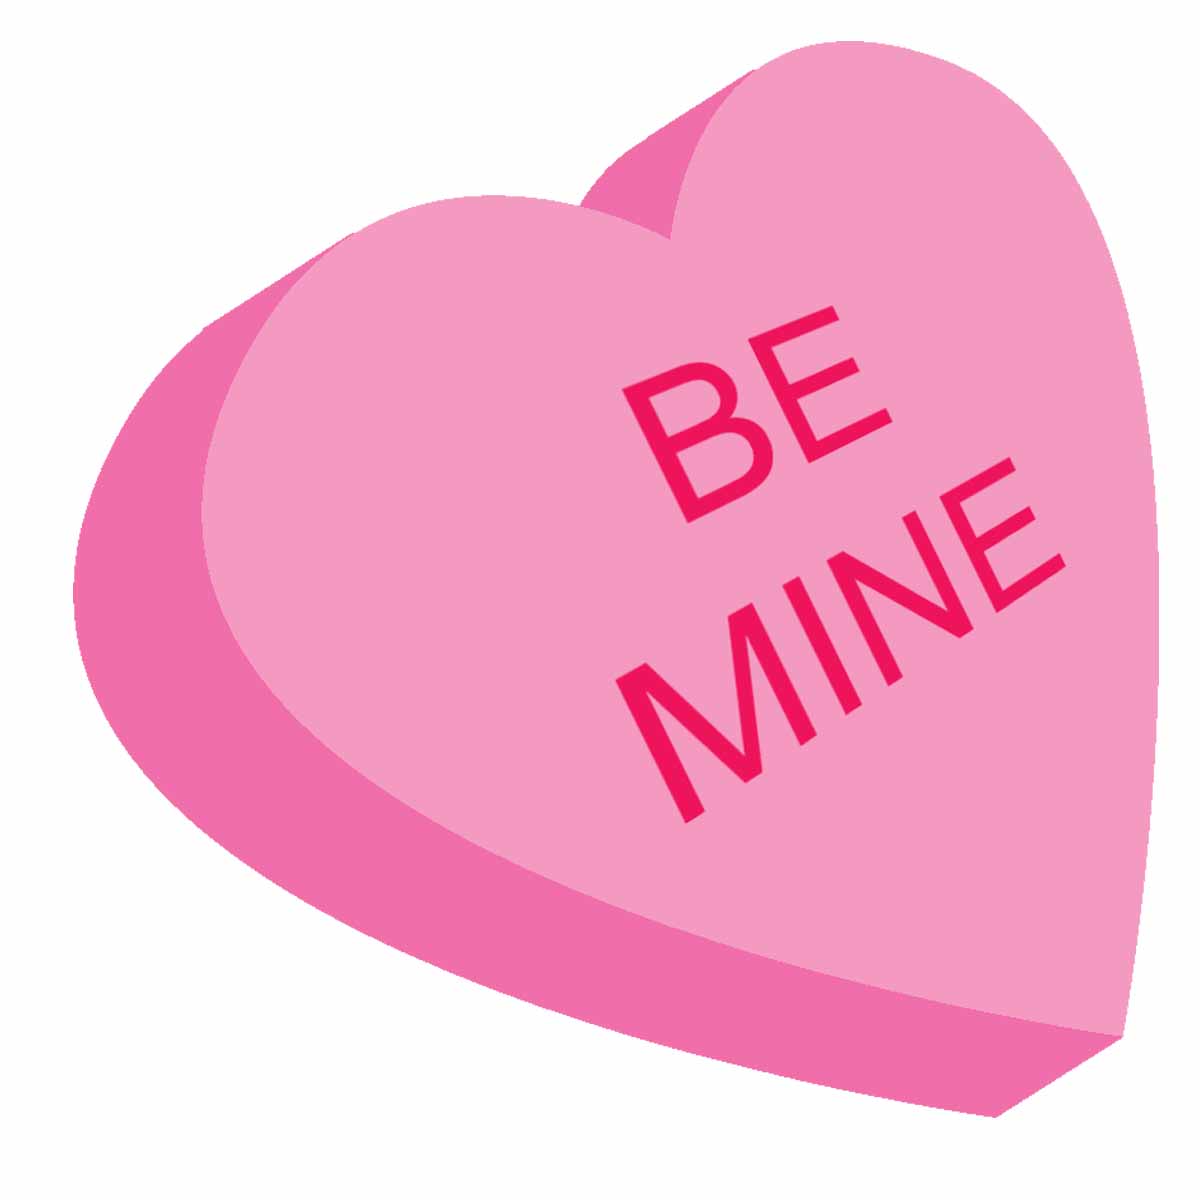 Romantic Valentine Candy Hearts Clipart Funny Pictures Shake The